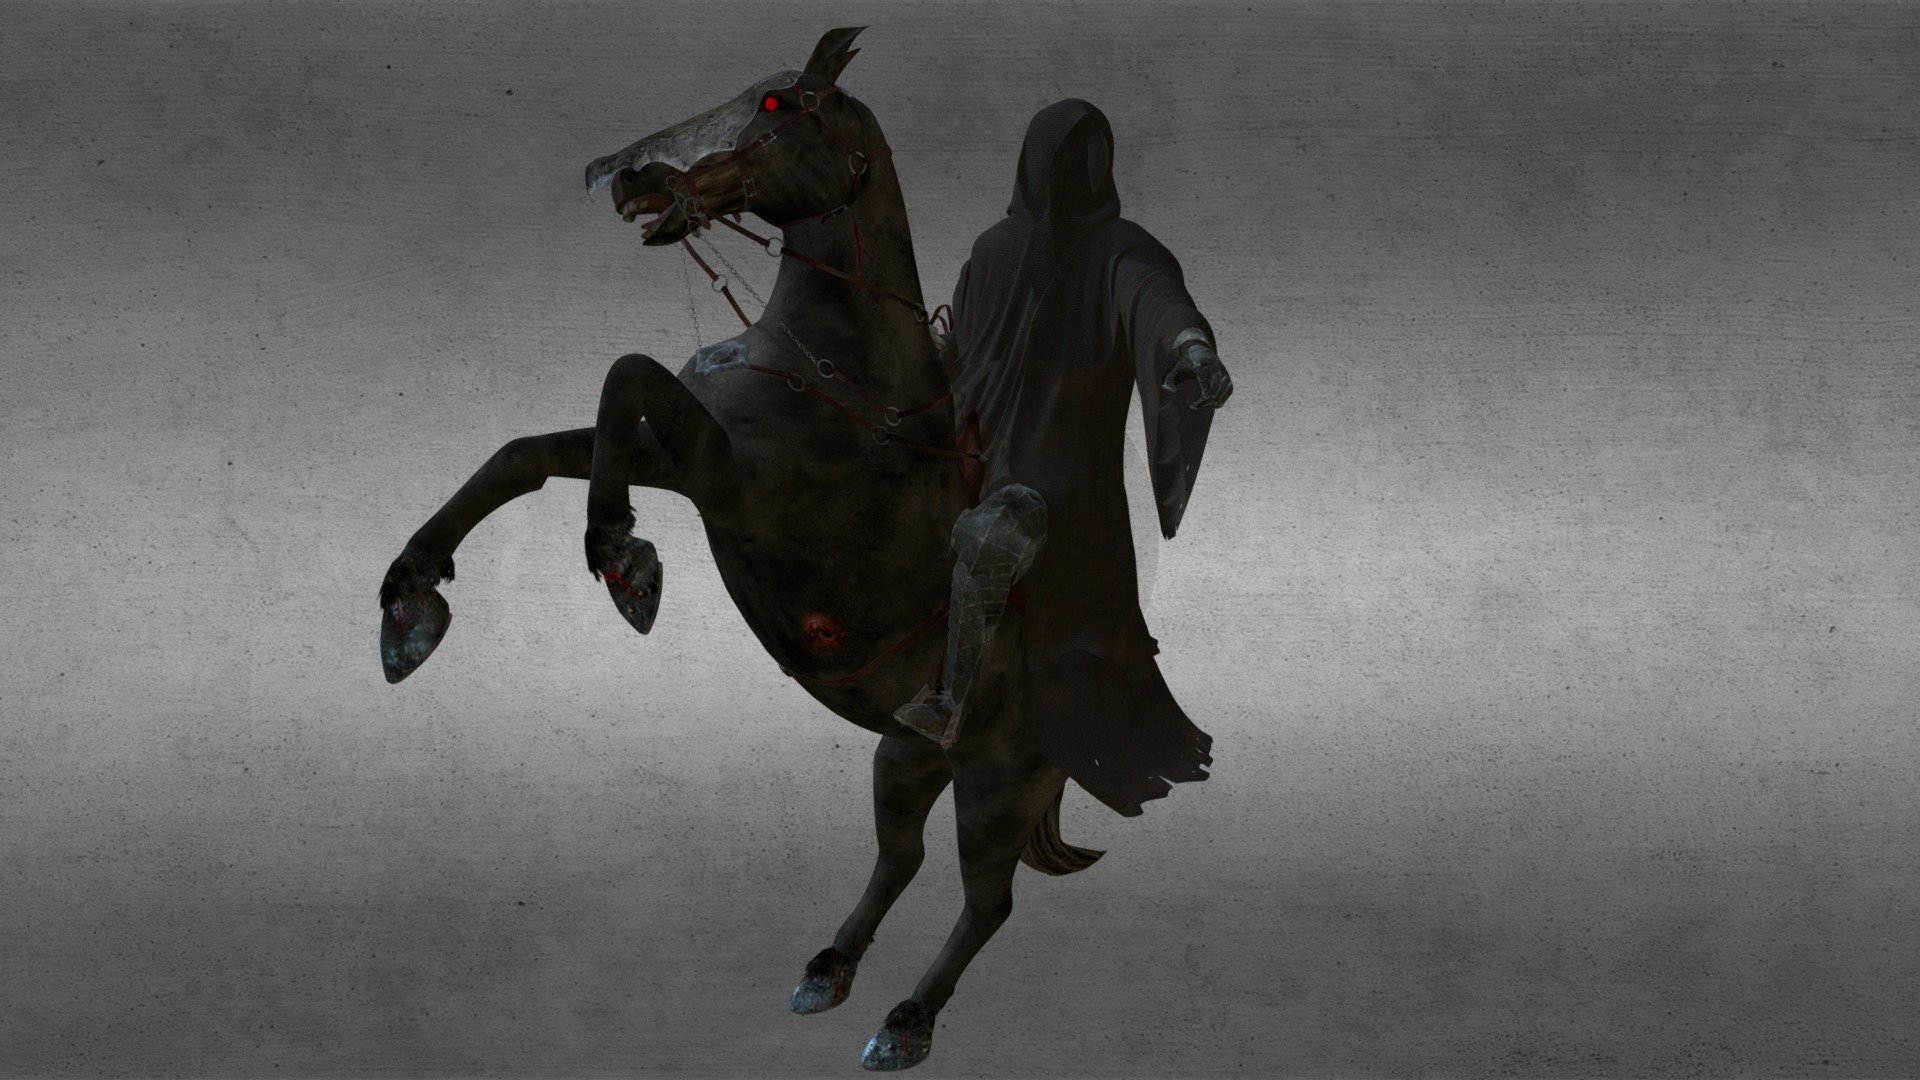 Drak rider from lord of the rings created for -link removed- - Dark Rider - 3D model by Buncic 3d model